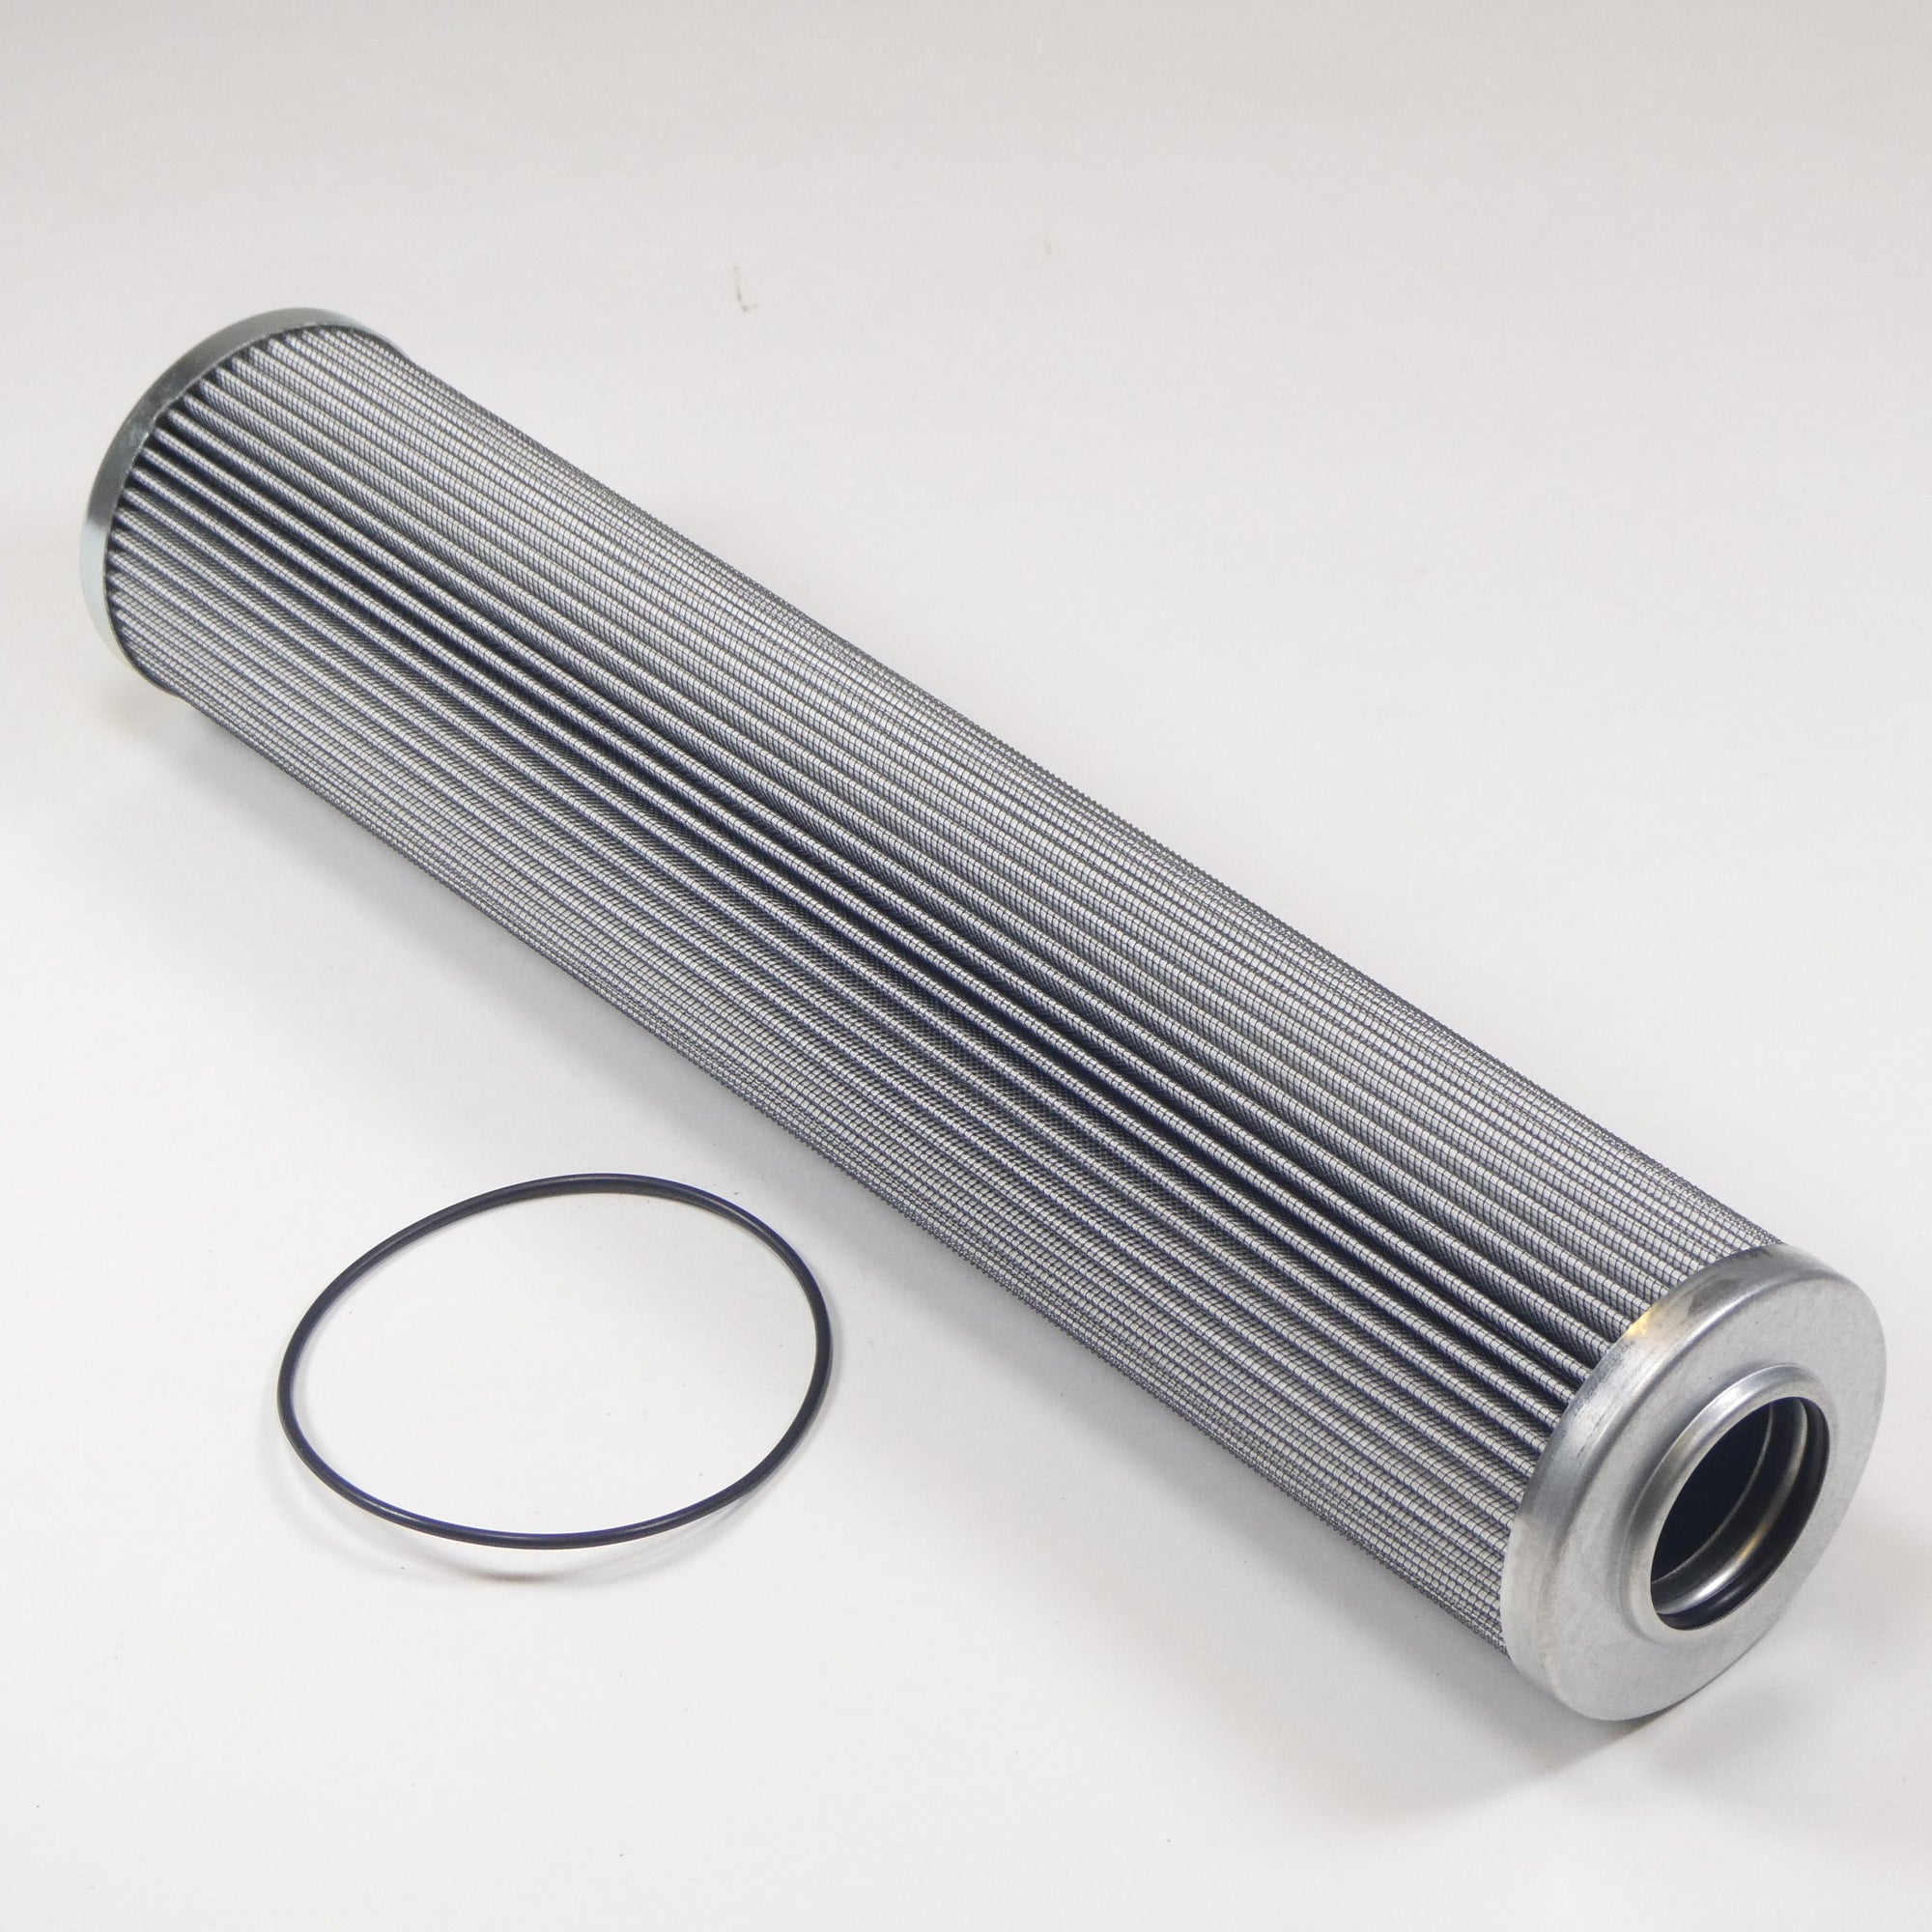 Hydrafil Replacement Filter Element for Argo V3.0833-03